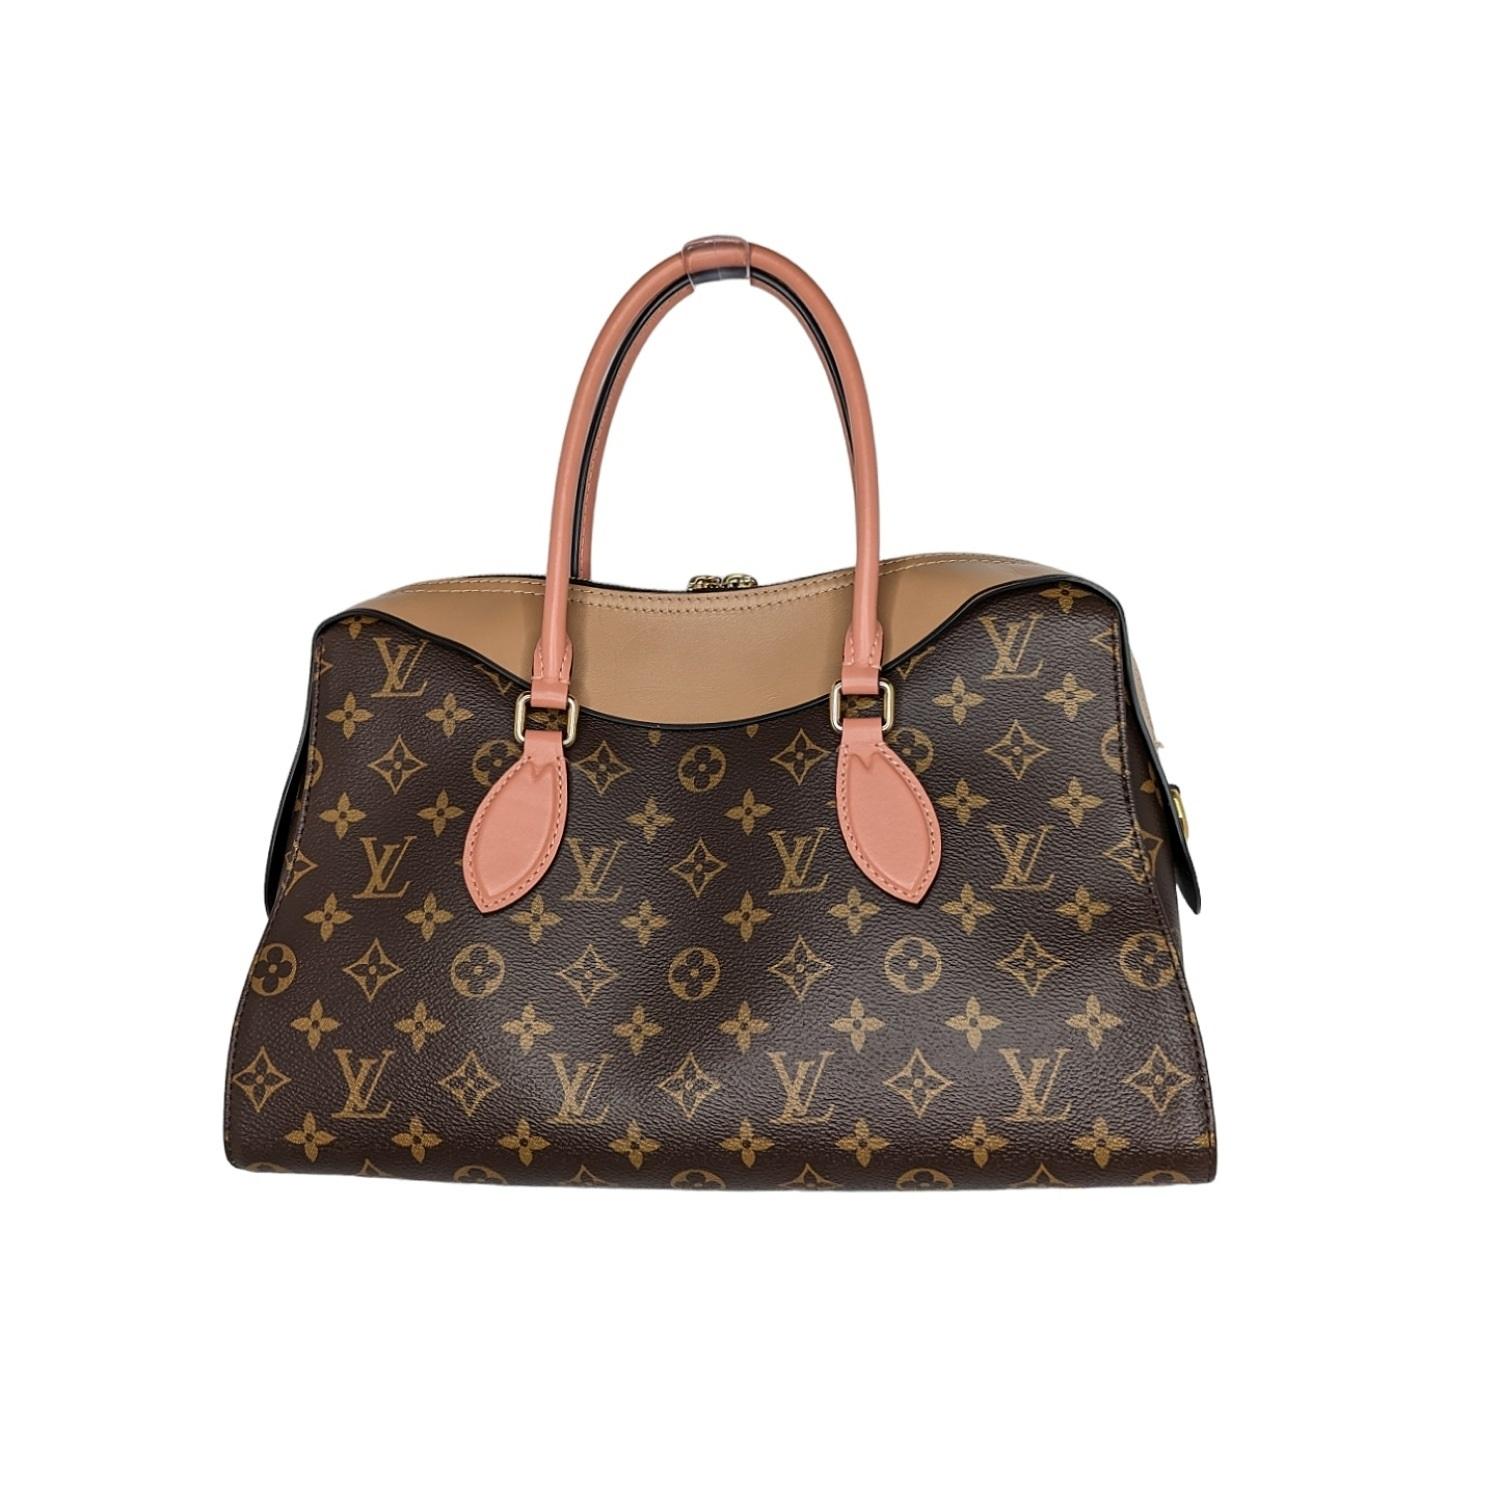 This chic handbag is crafted of Louis Vuitton monogram toile canvas with cowhide leather accents in pink and tan. The bag features rolled cowhide pink leather top handles with polished brass links. The top zipper opens to a beige microfiber interior